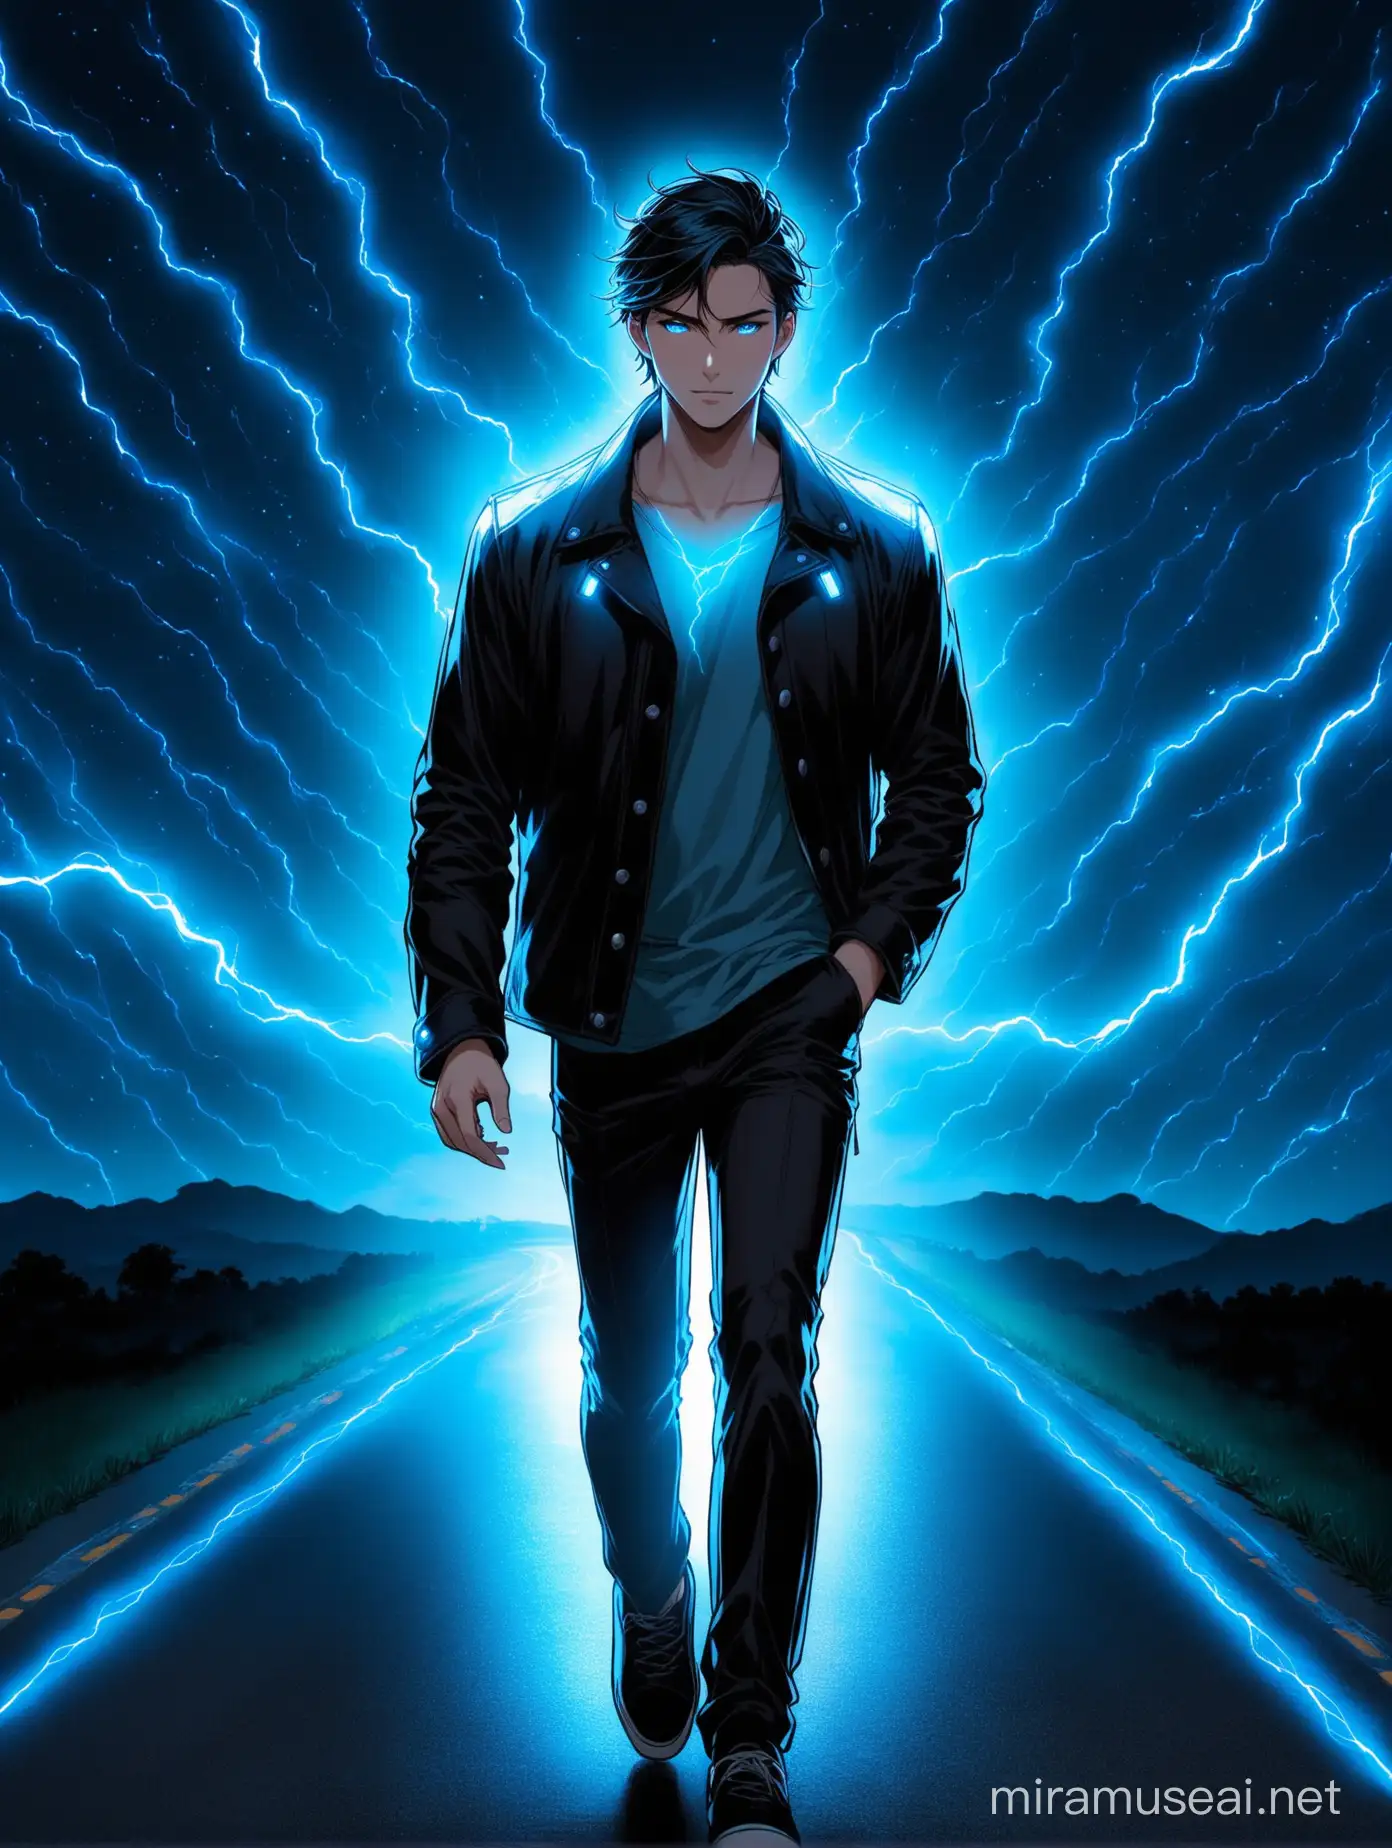 A handsome young man walking on the road with blue luminous lightening lights surrounding him in the dark of the night